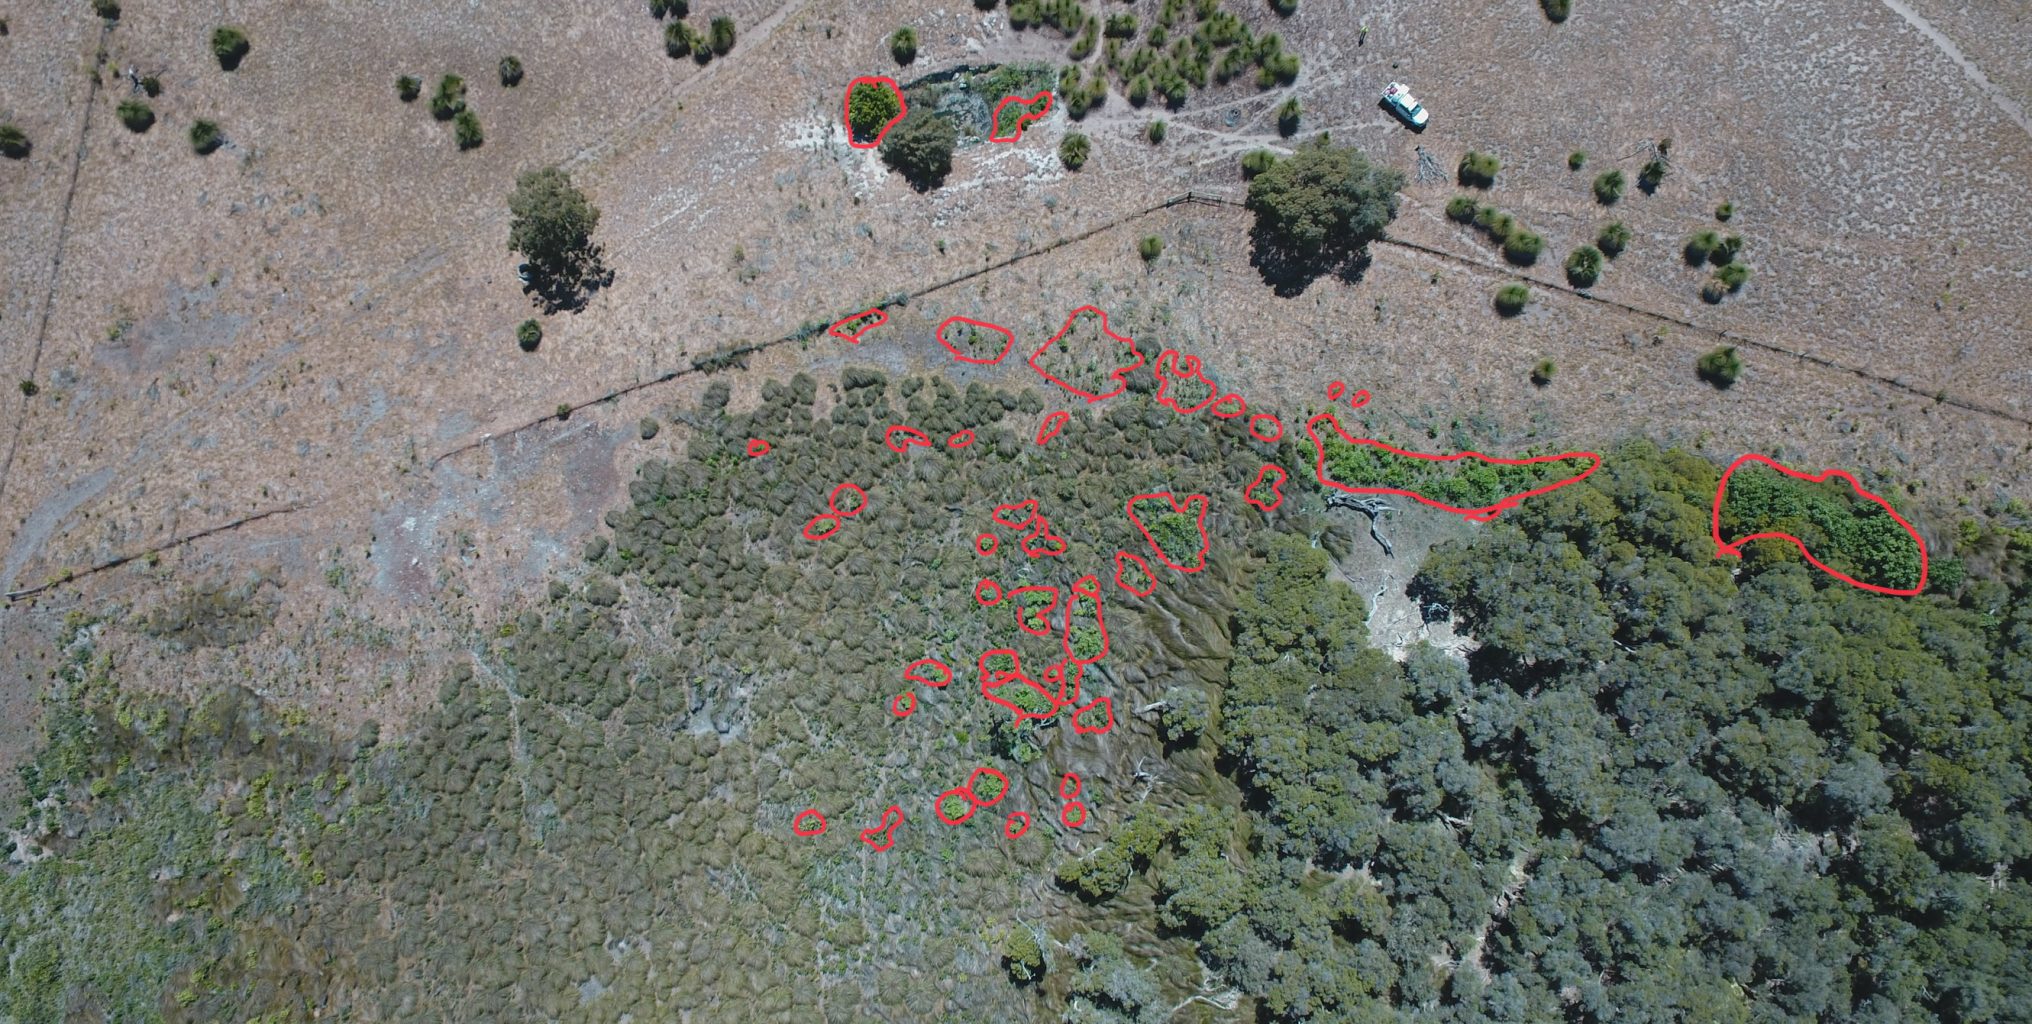 Employed RPA to inspect the area for weeds (circled in red).